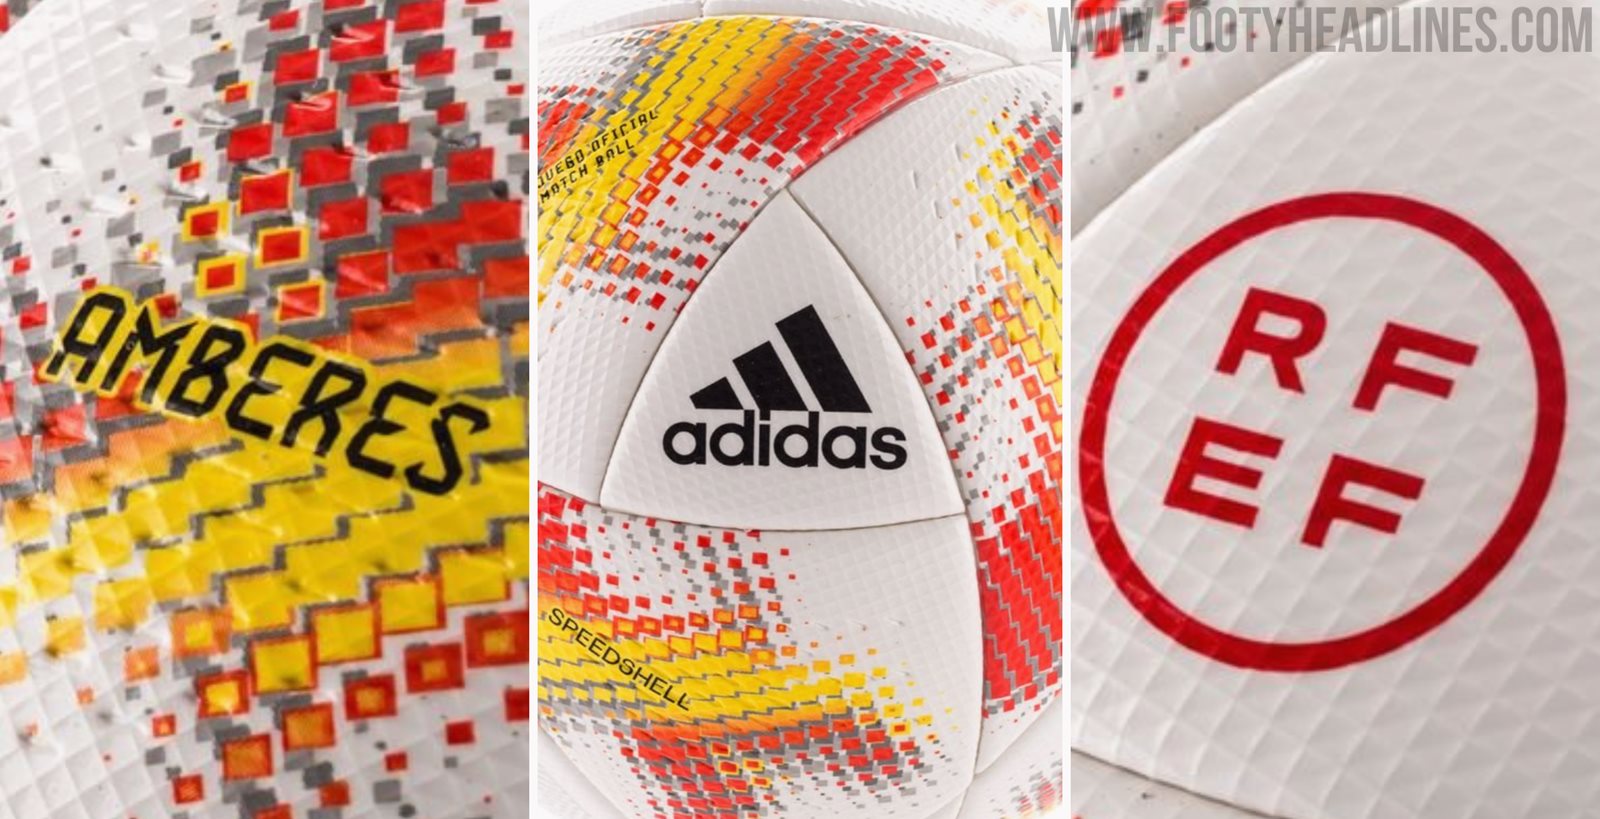 Mooie vrouw Nevelig Pathologisch Based on 2022 World Cup Ball: Adidas Spain Copa del Rey & Super Cup 22-23  Ball Released - Footy Headlines